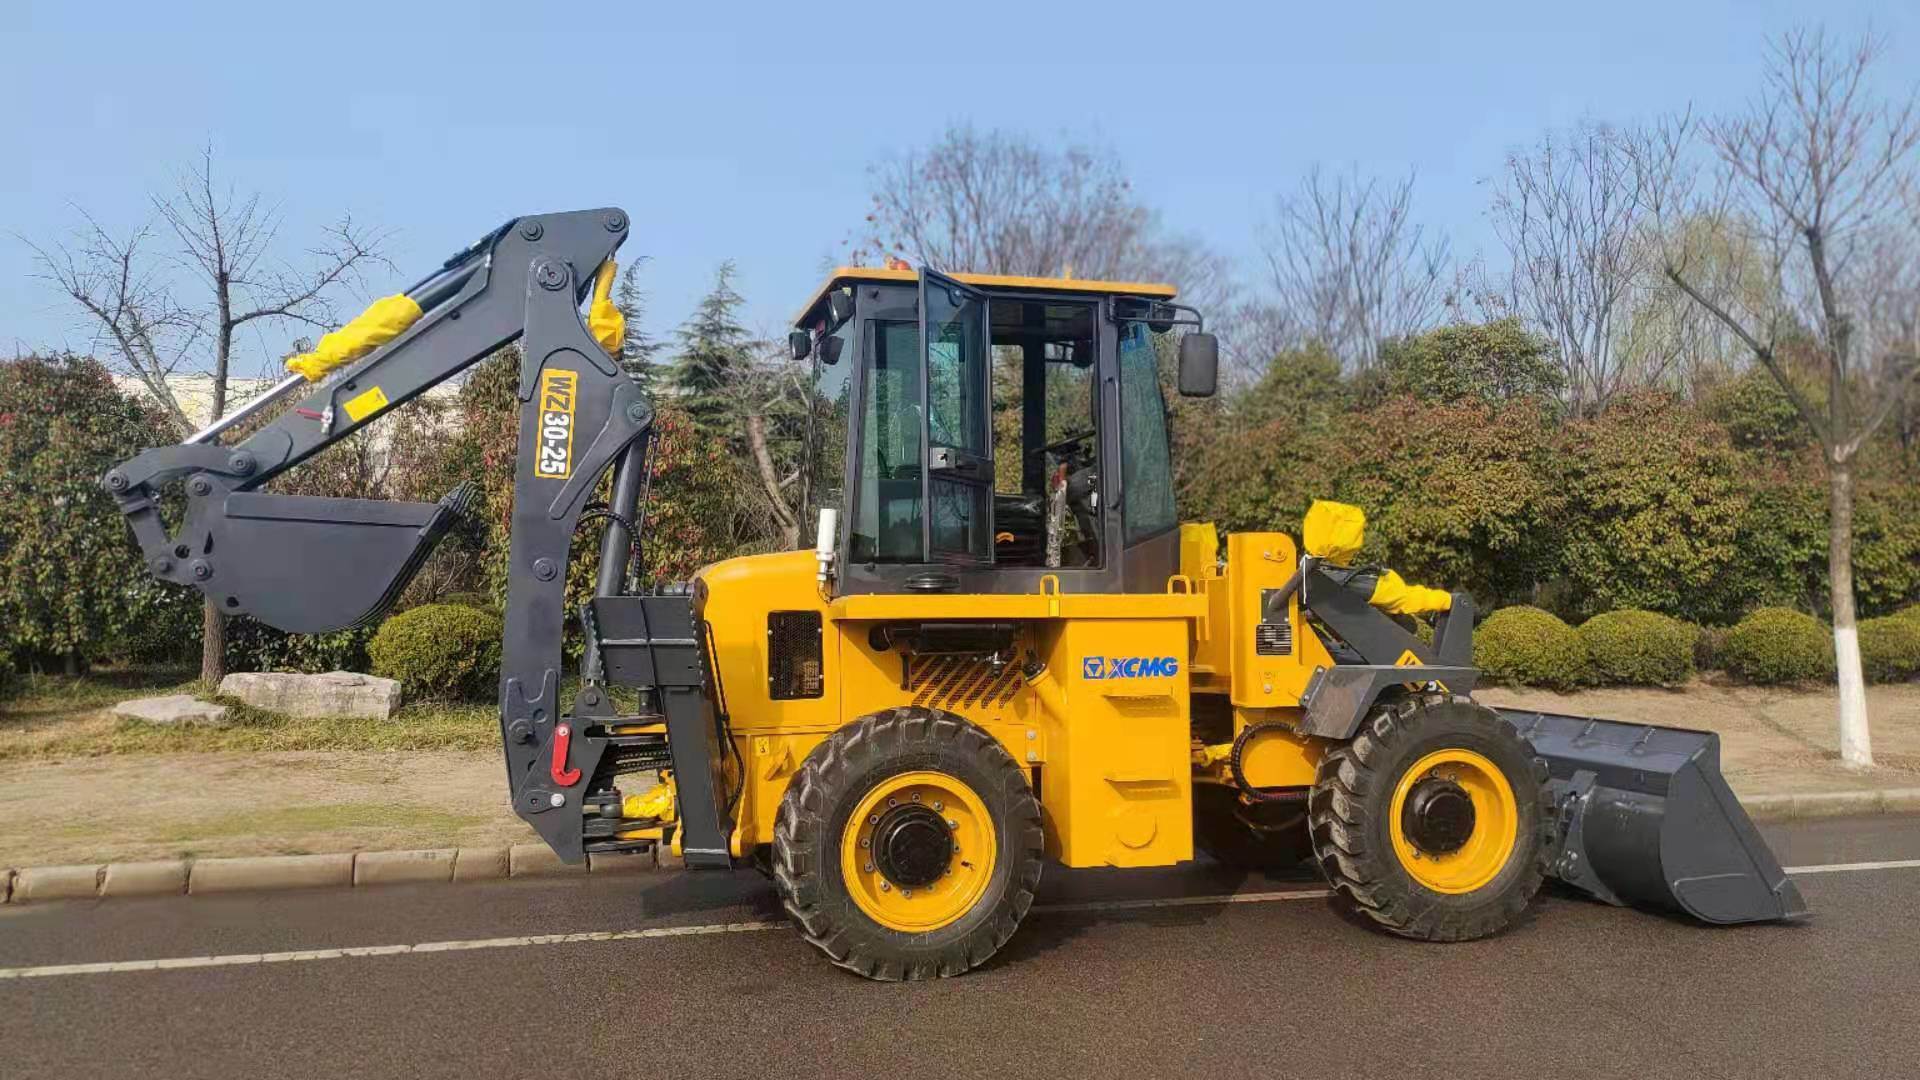 Backhoe Loader Wz30-25 with 1m3 Bucket and 0.3m3 Digger in Stock